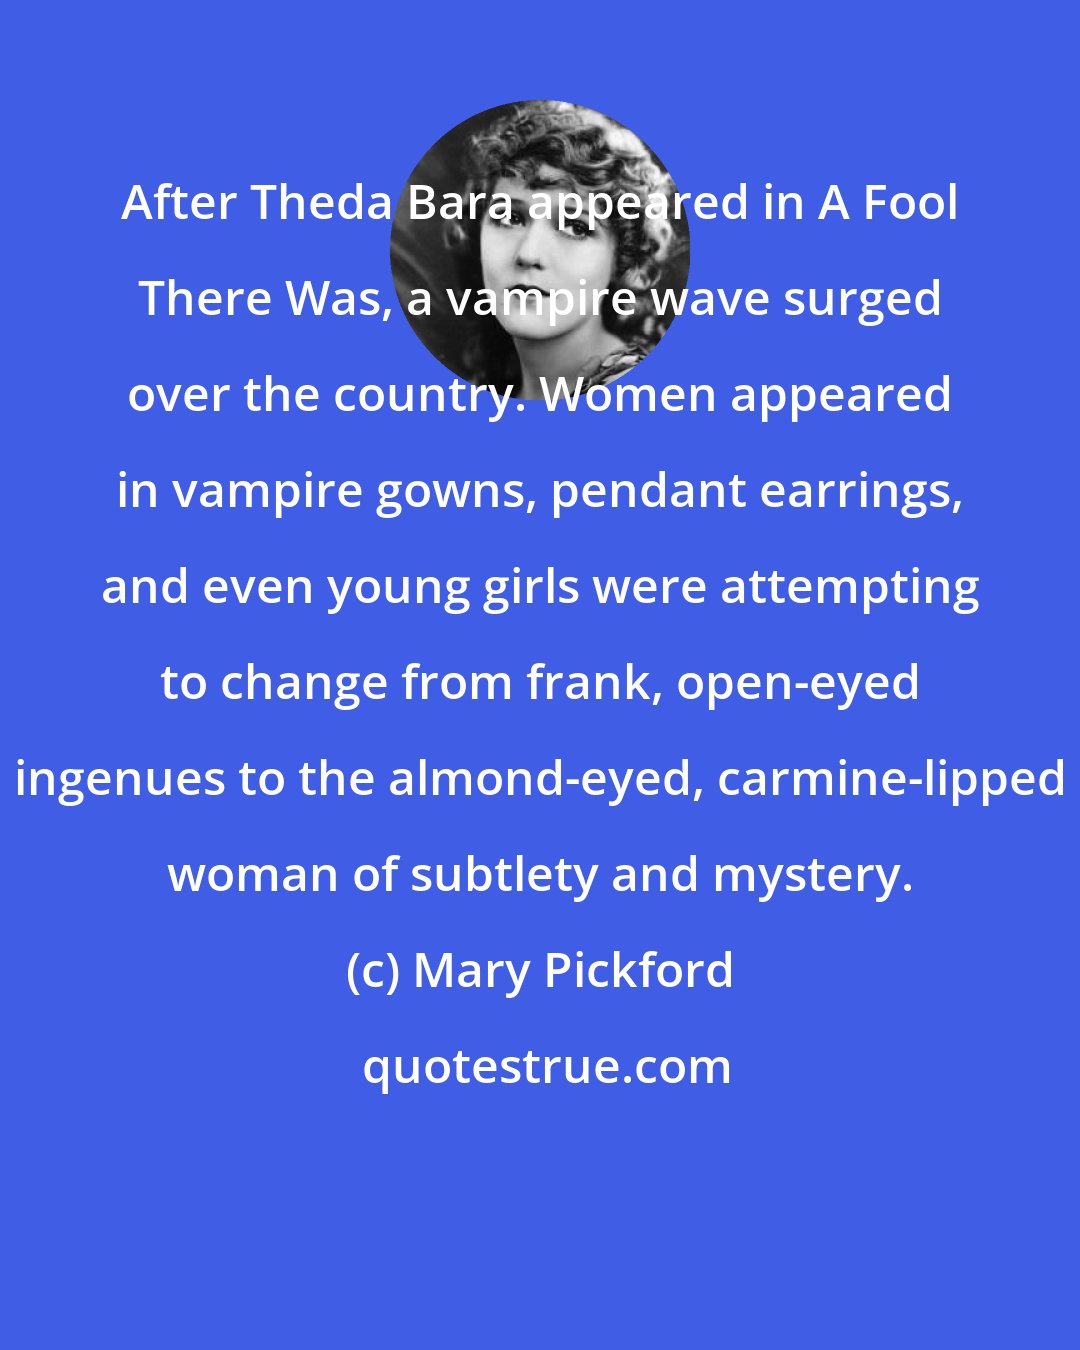 Mary Pickford: After Theda Bara appeared in A Fool There Was, a vampire wave surged over the country. Women appeared in vampire gowns, pendant earrings, and even young girls were attempting to change from frank, open-eyed ingenues to the almond-eyed, carmine-lipped woman of subtlety and mystery.